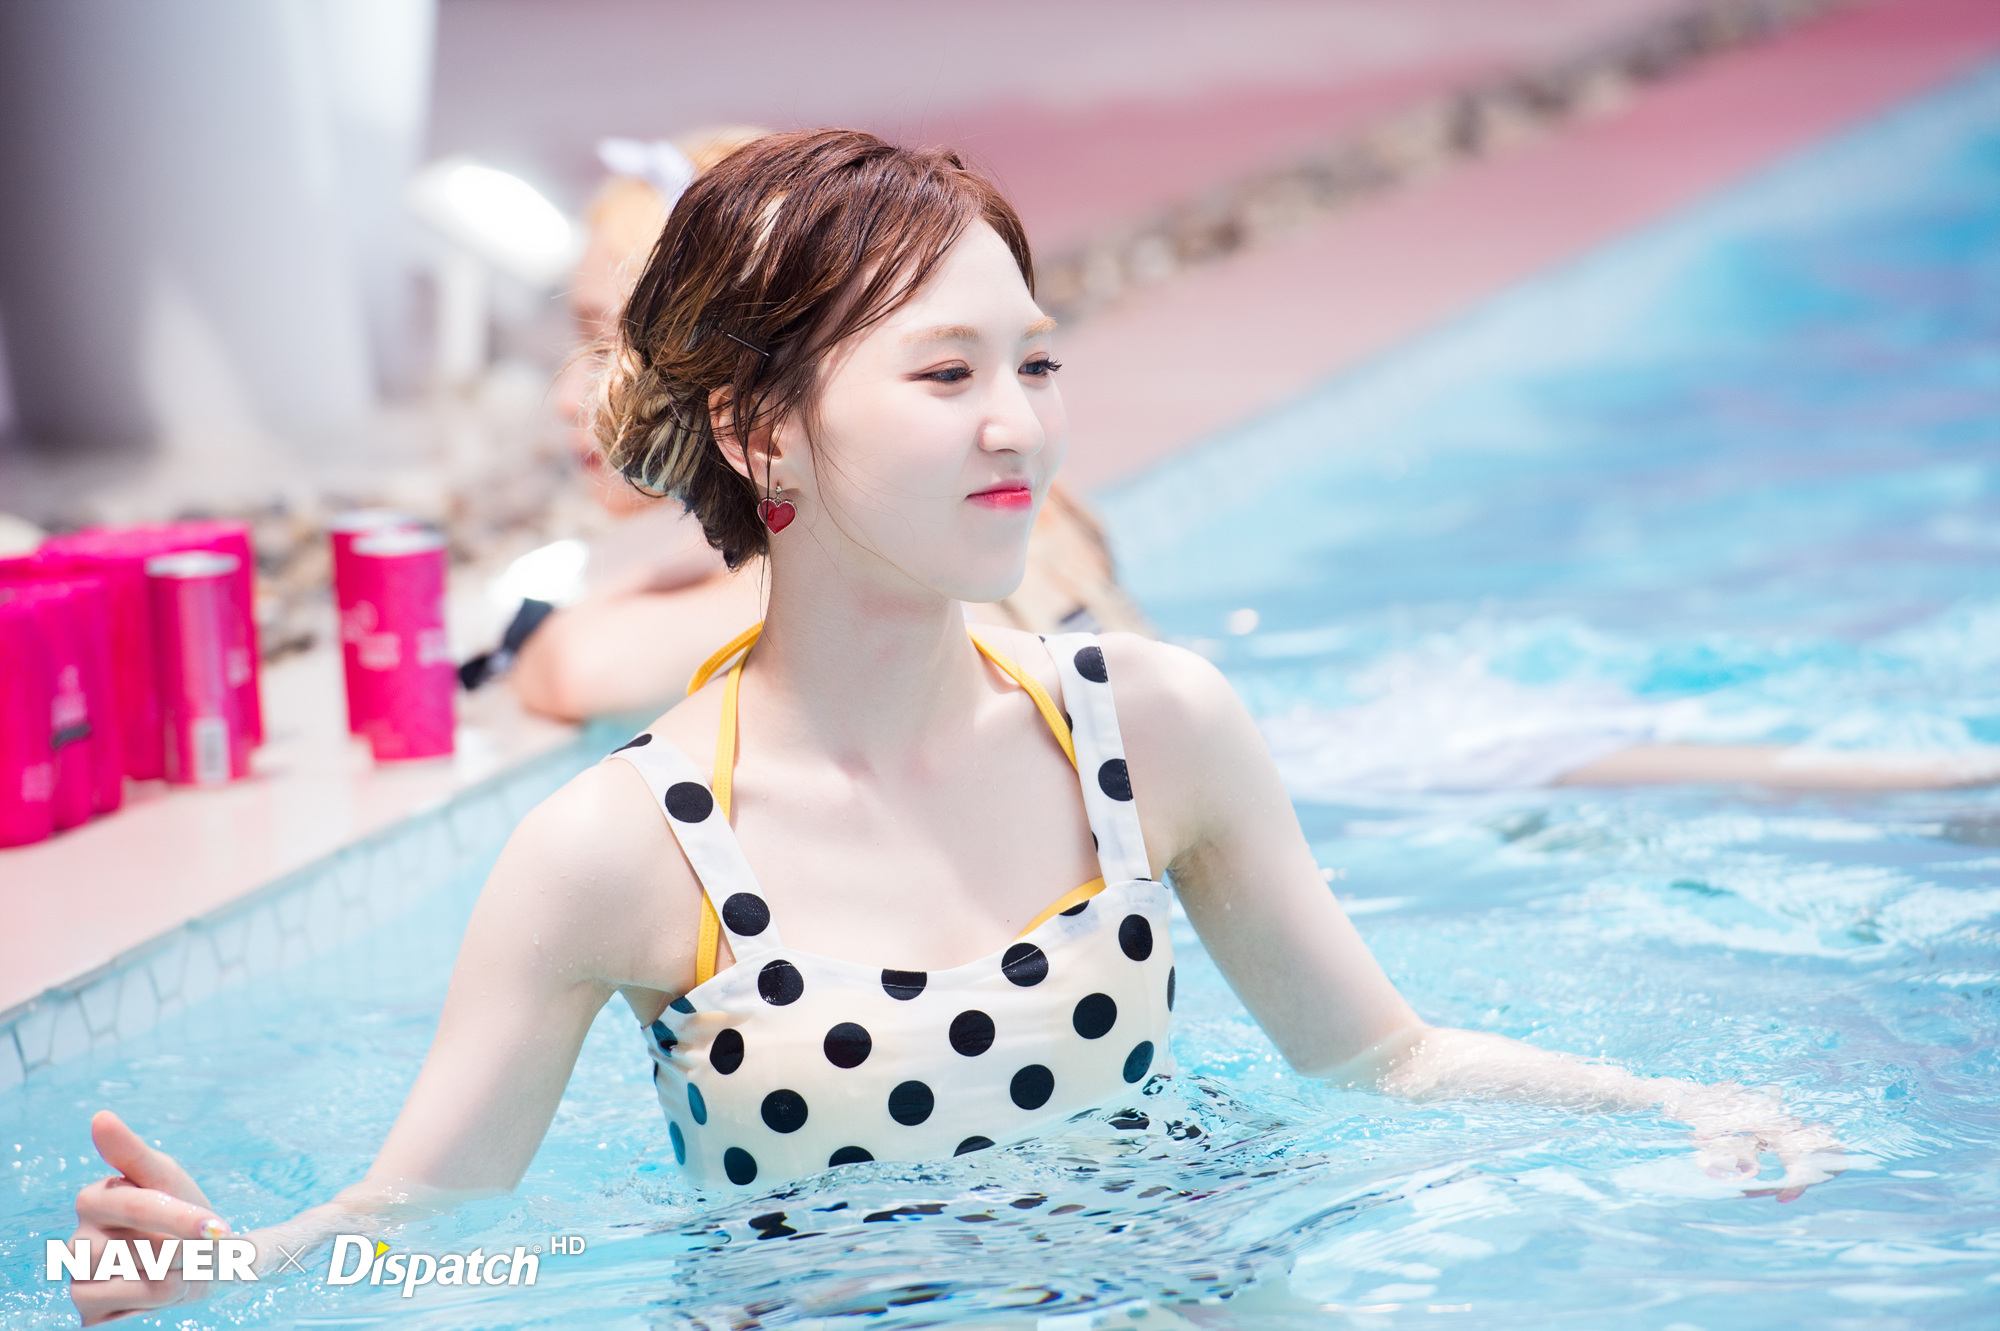 HD Photo From The Red Velvet Pool Party You Wish You Were